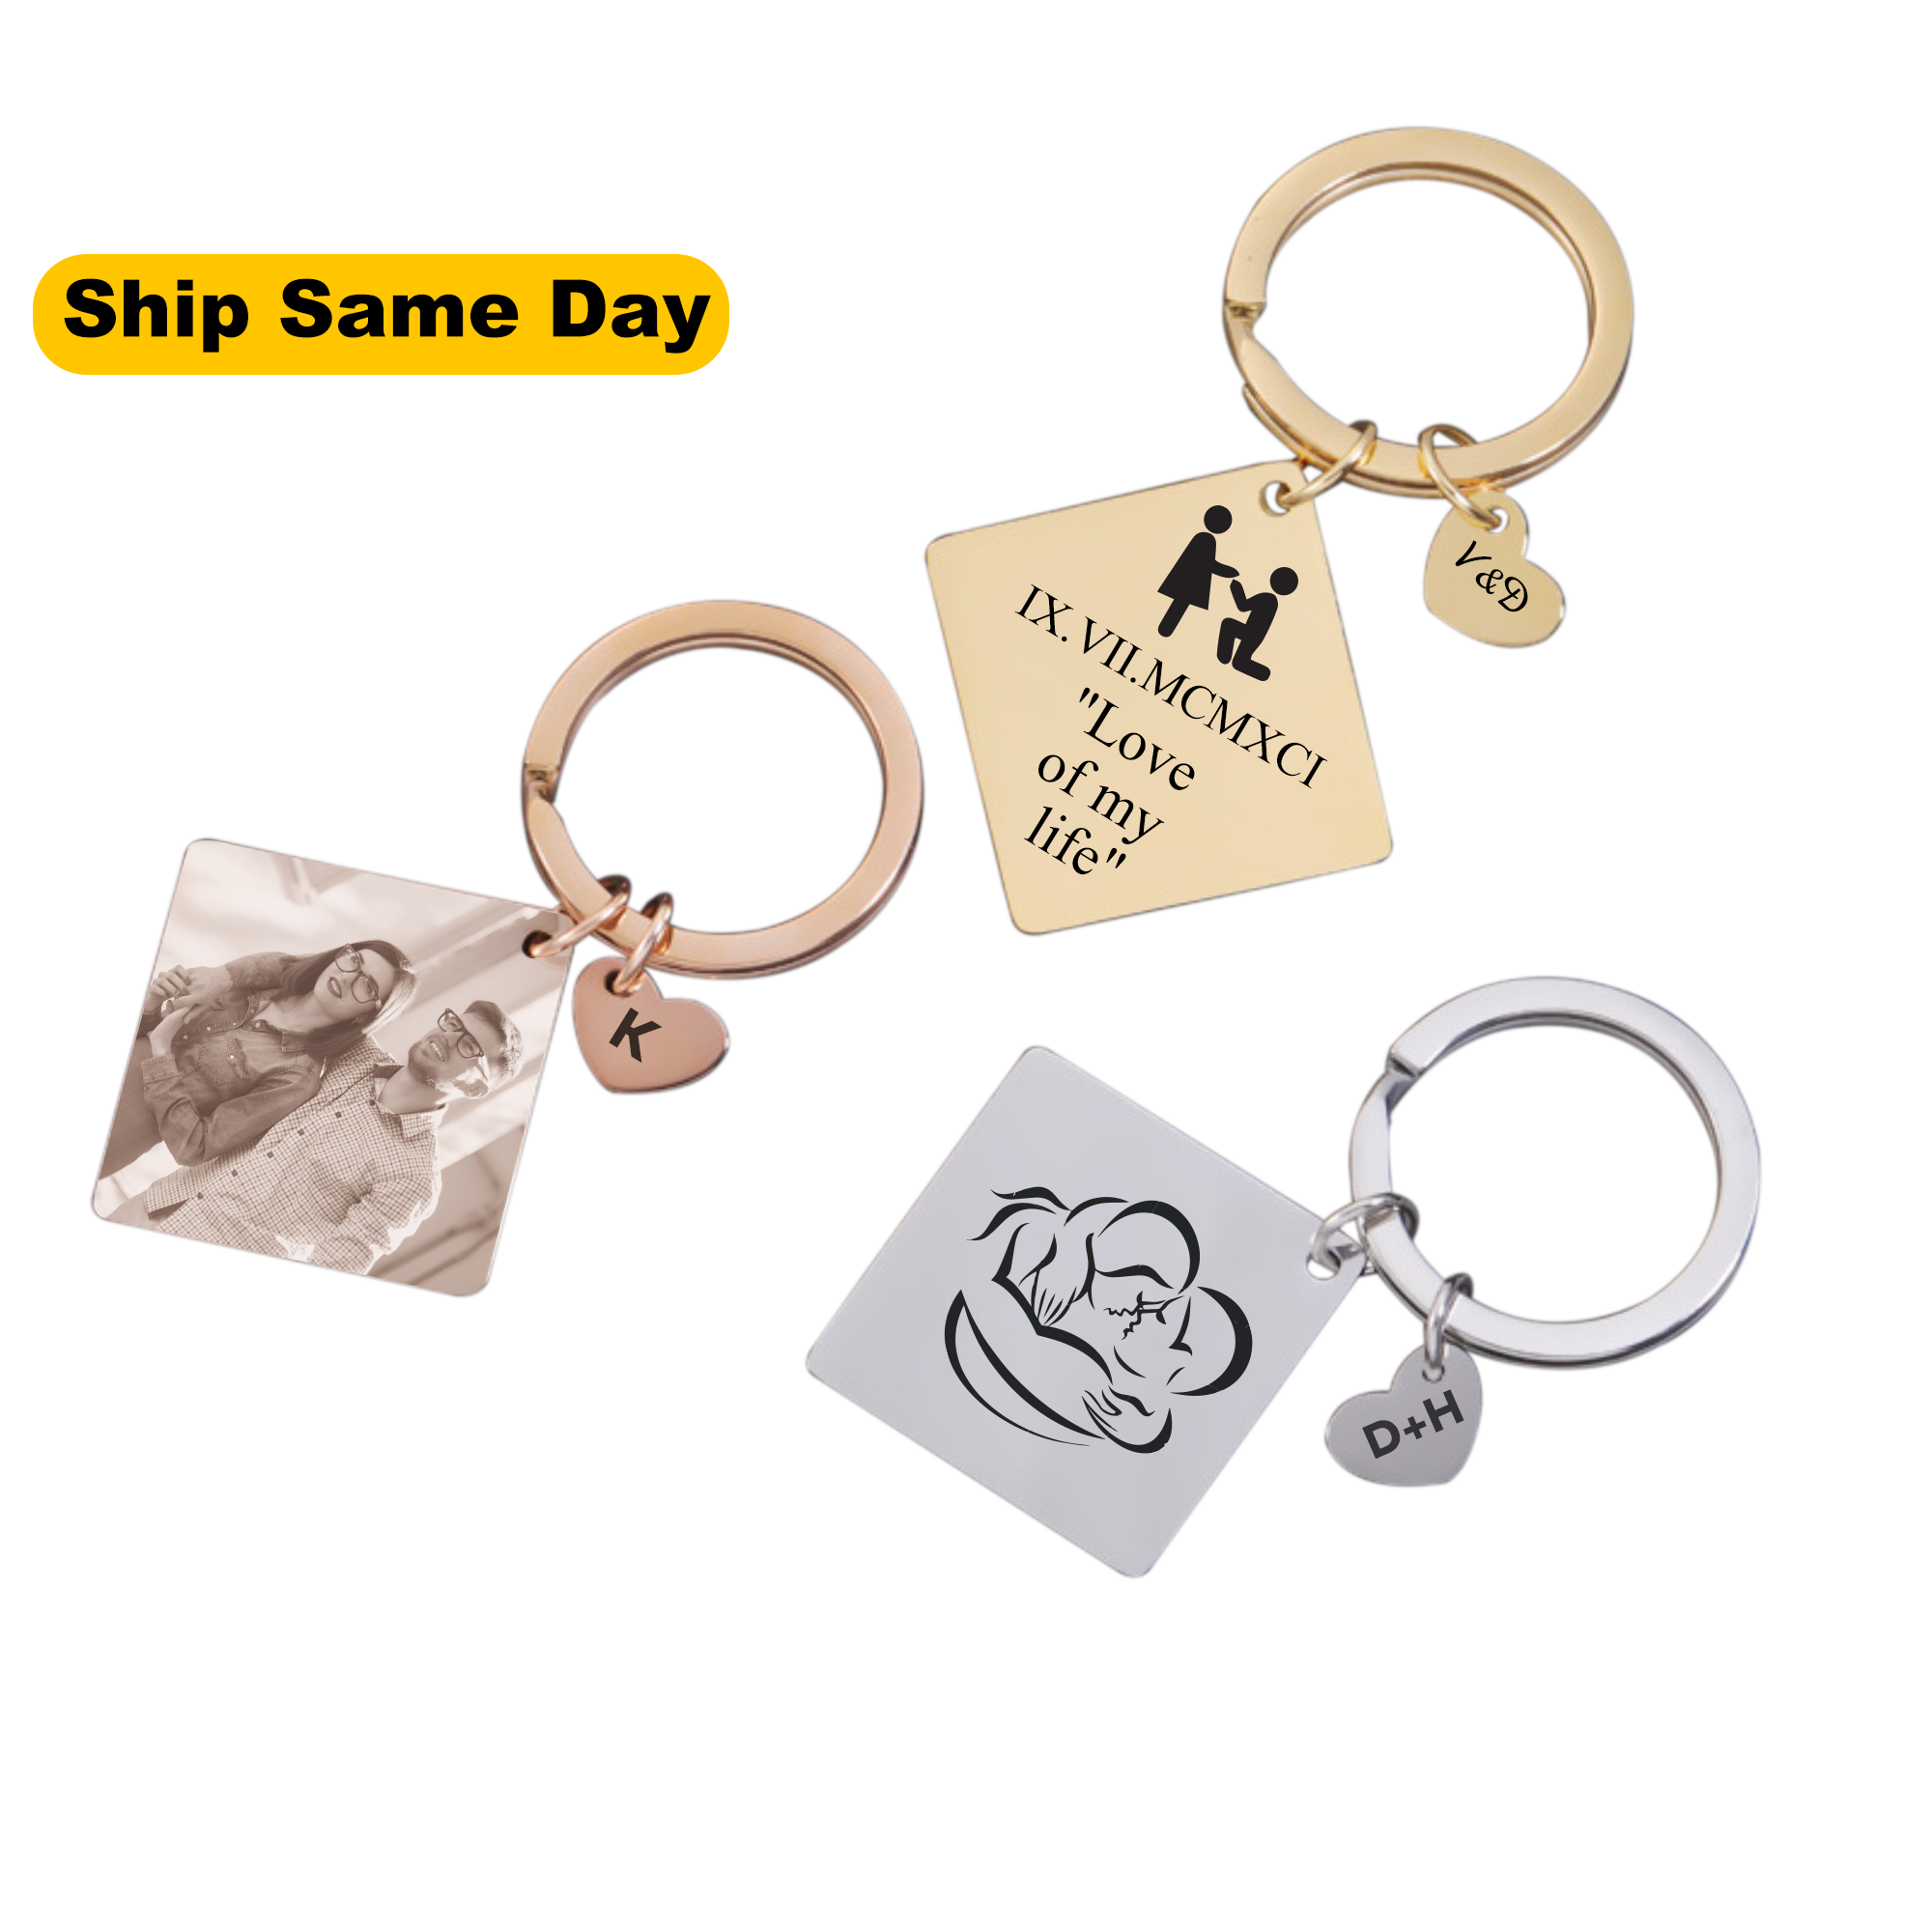 Custom Engraved Square with Heart Charm Keychain KCK 18